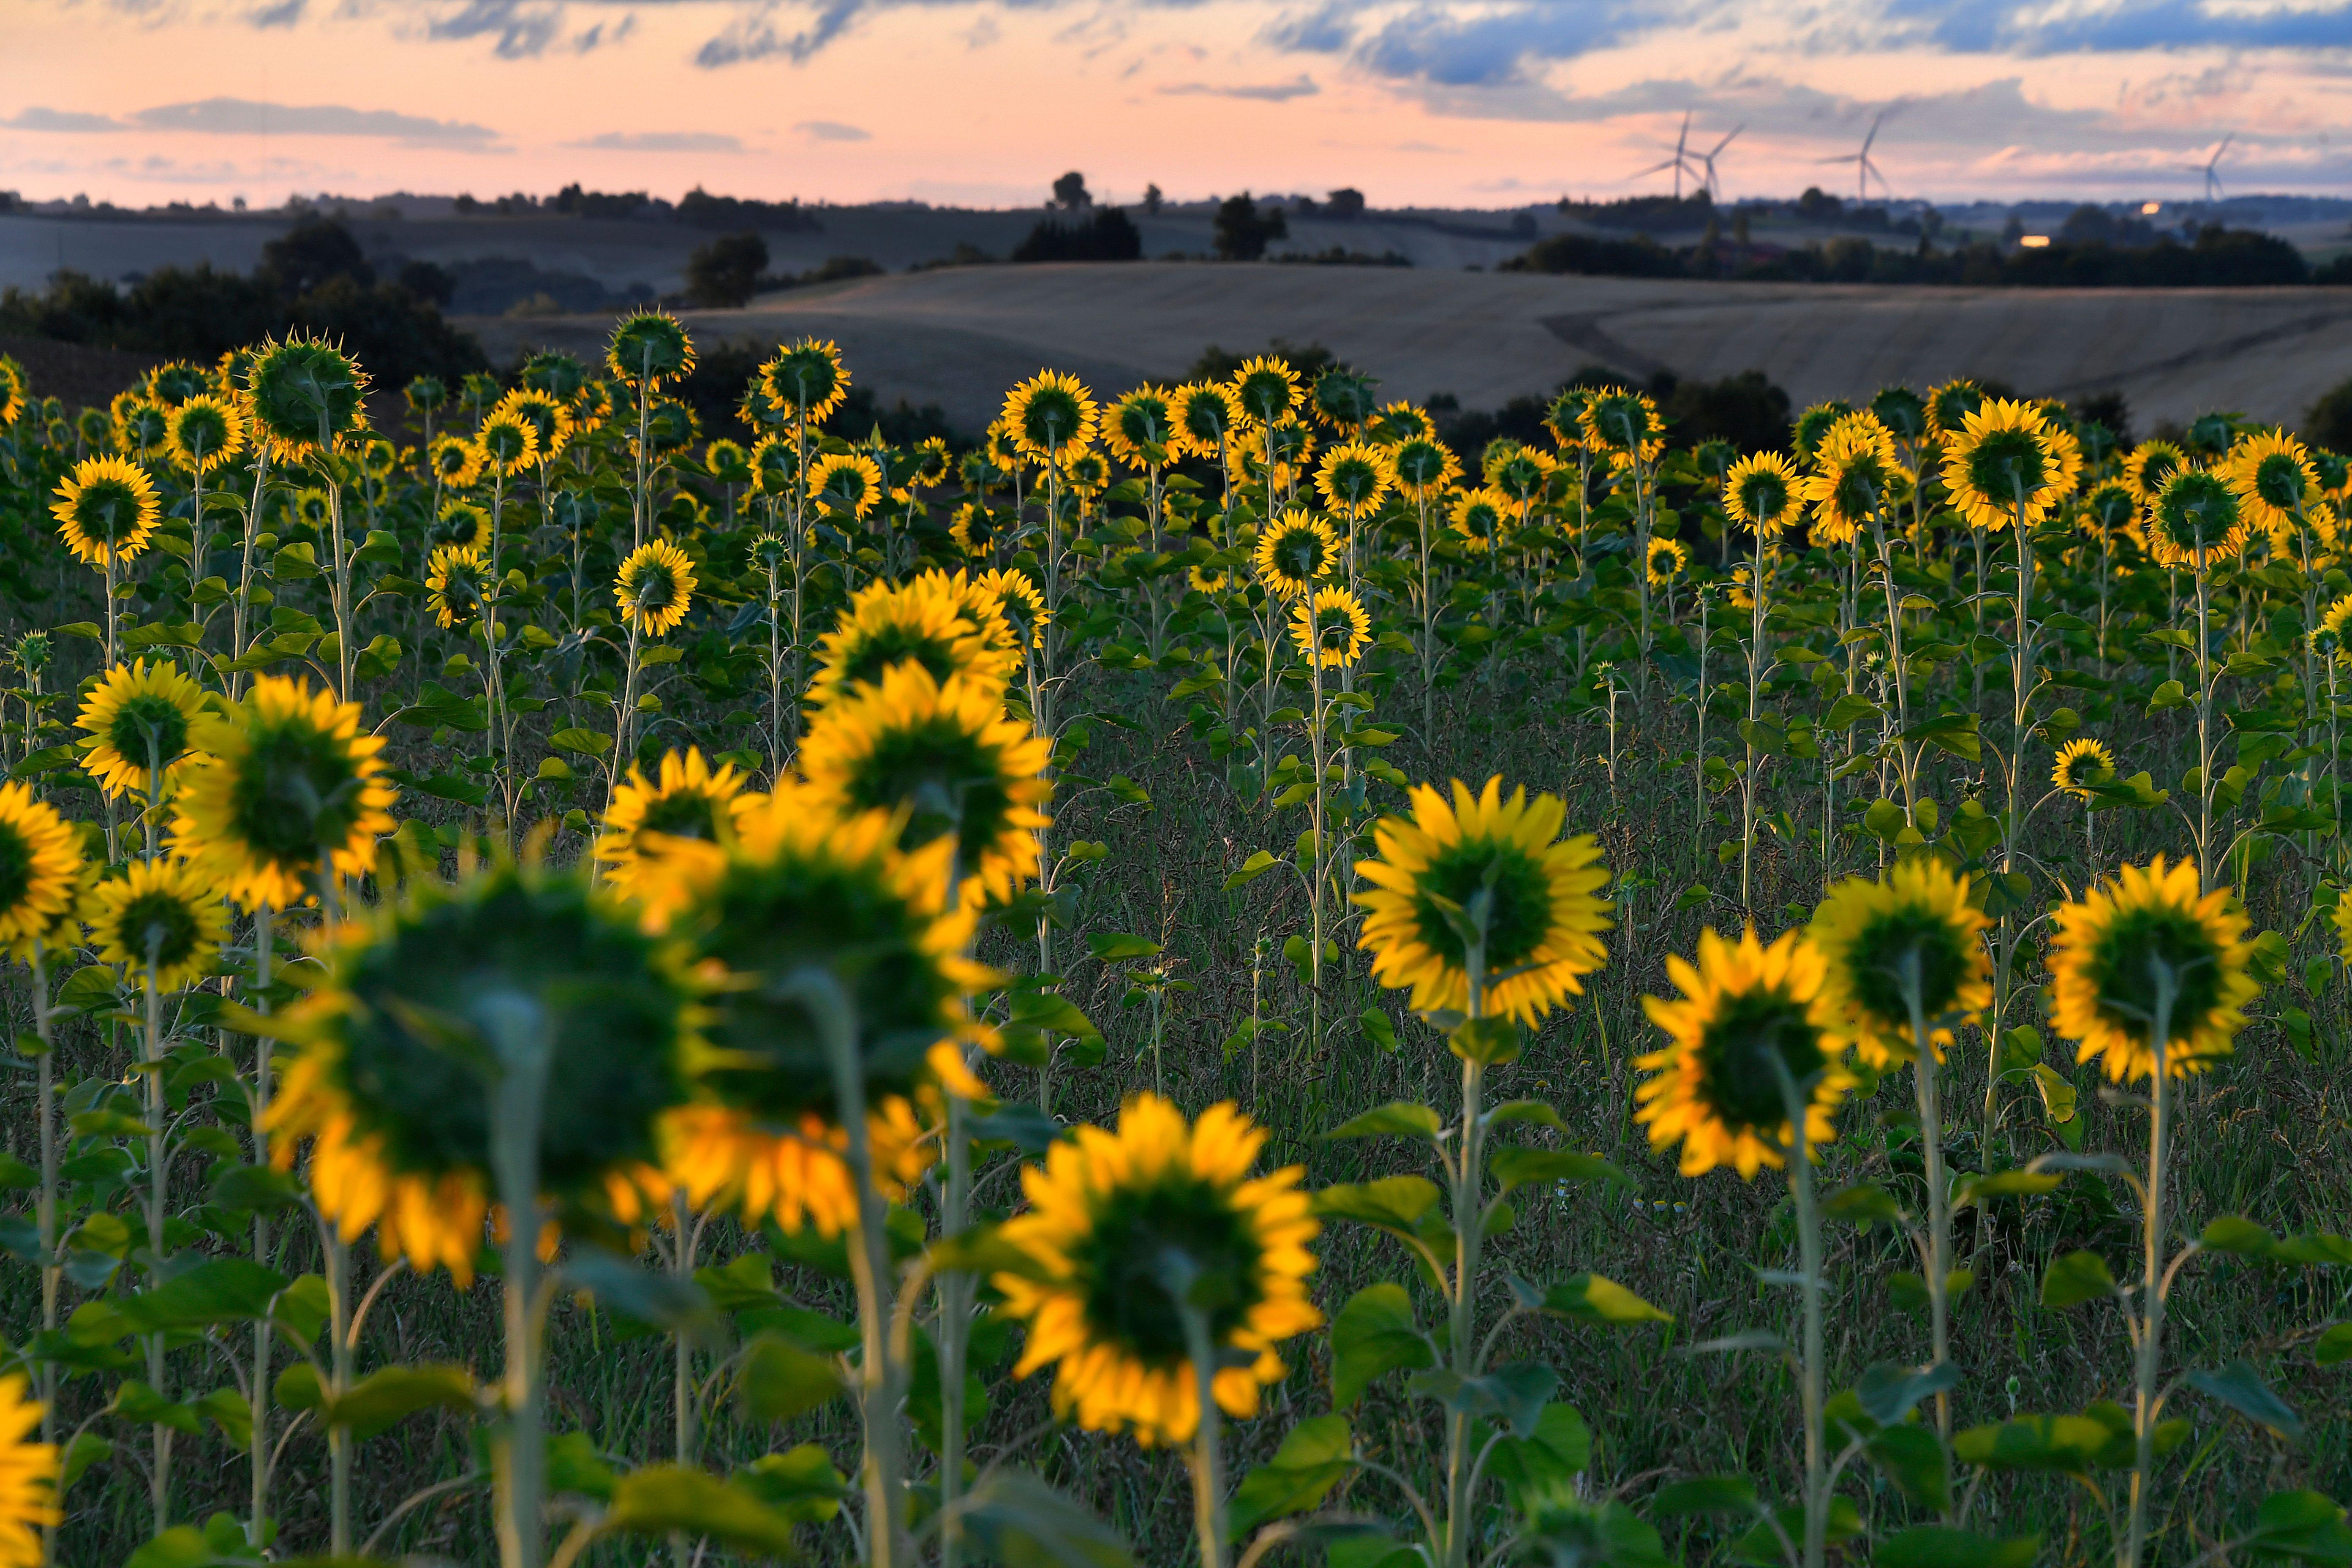 A field of sunflowers at dawn